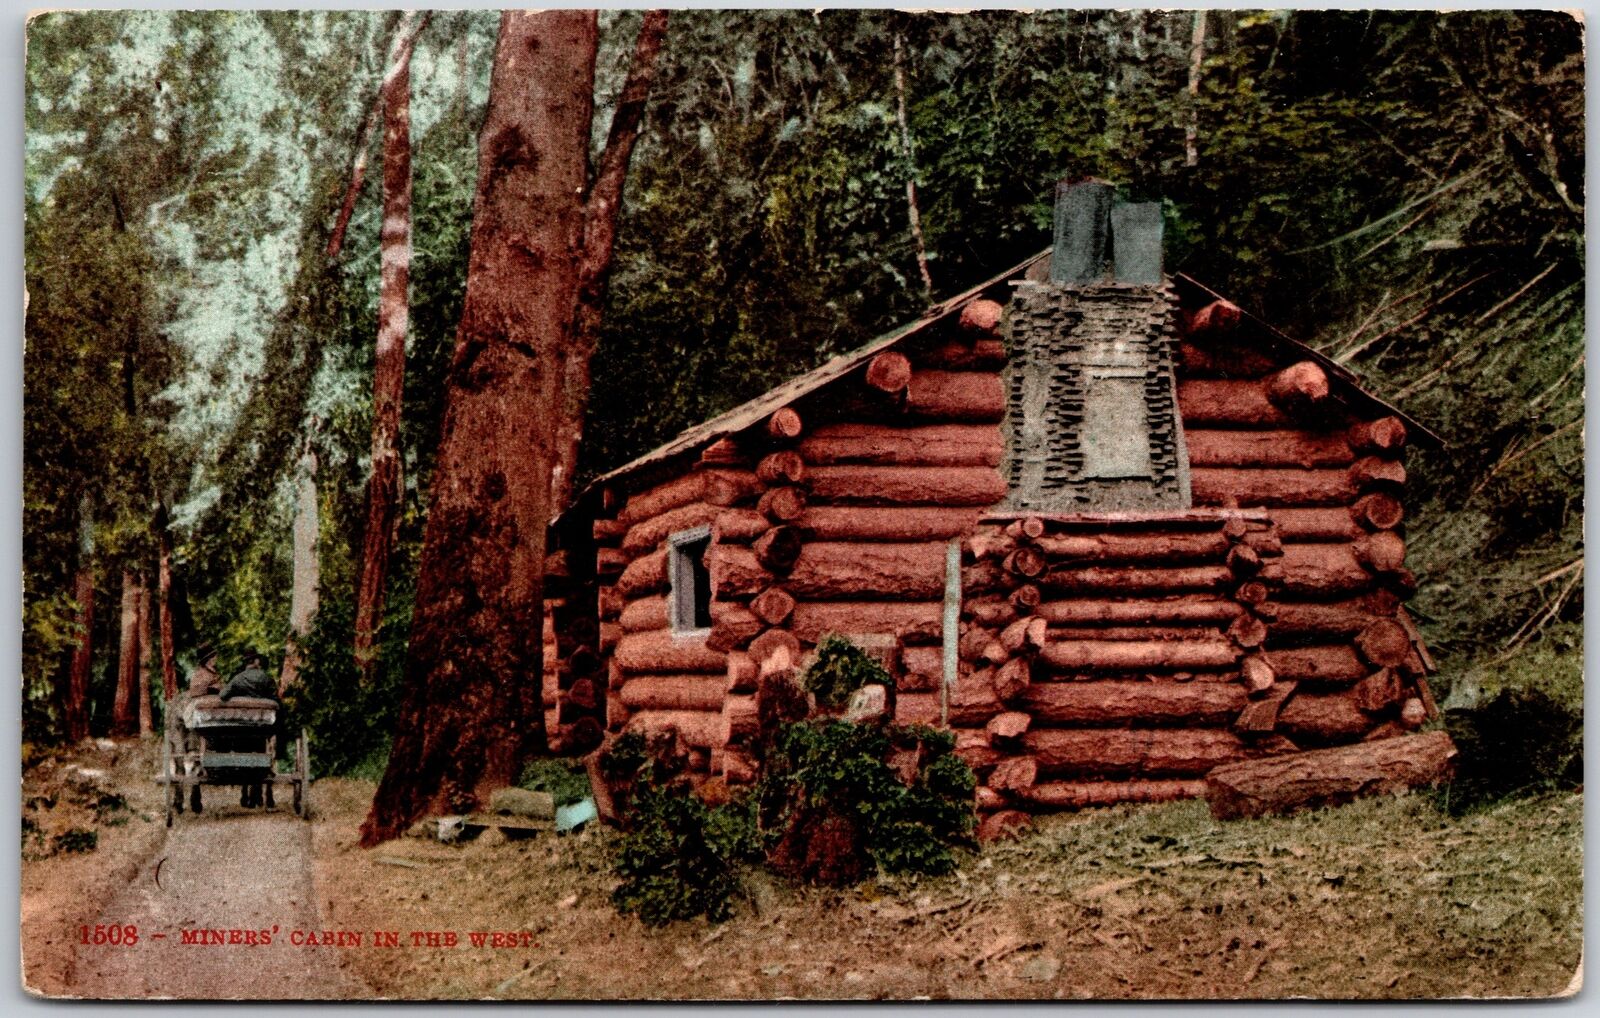 Miners Cabin In The West on the Woods Trail Pathway Postcard